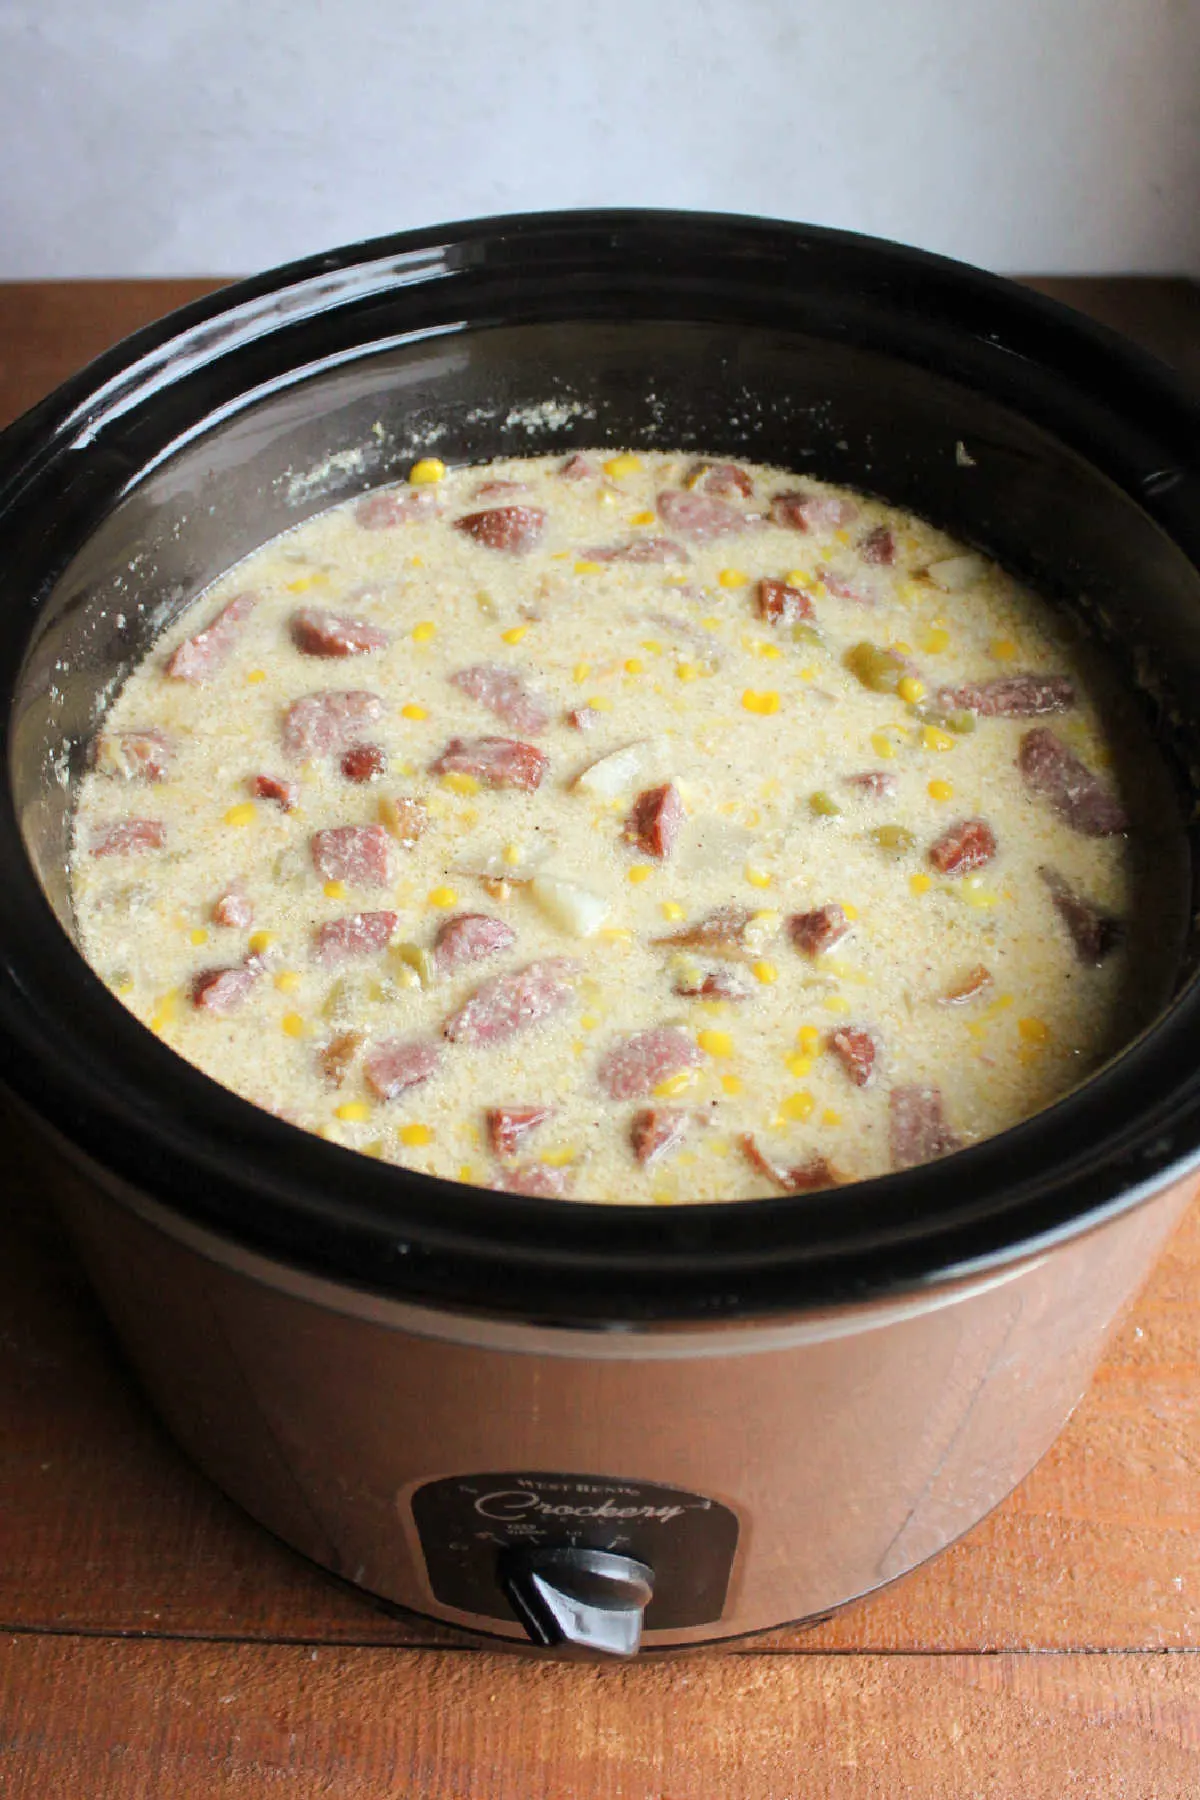 Slow cooker filled with cooked chowder showing creamy broth and lots of chunks.